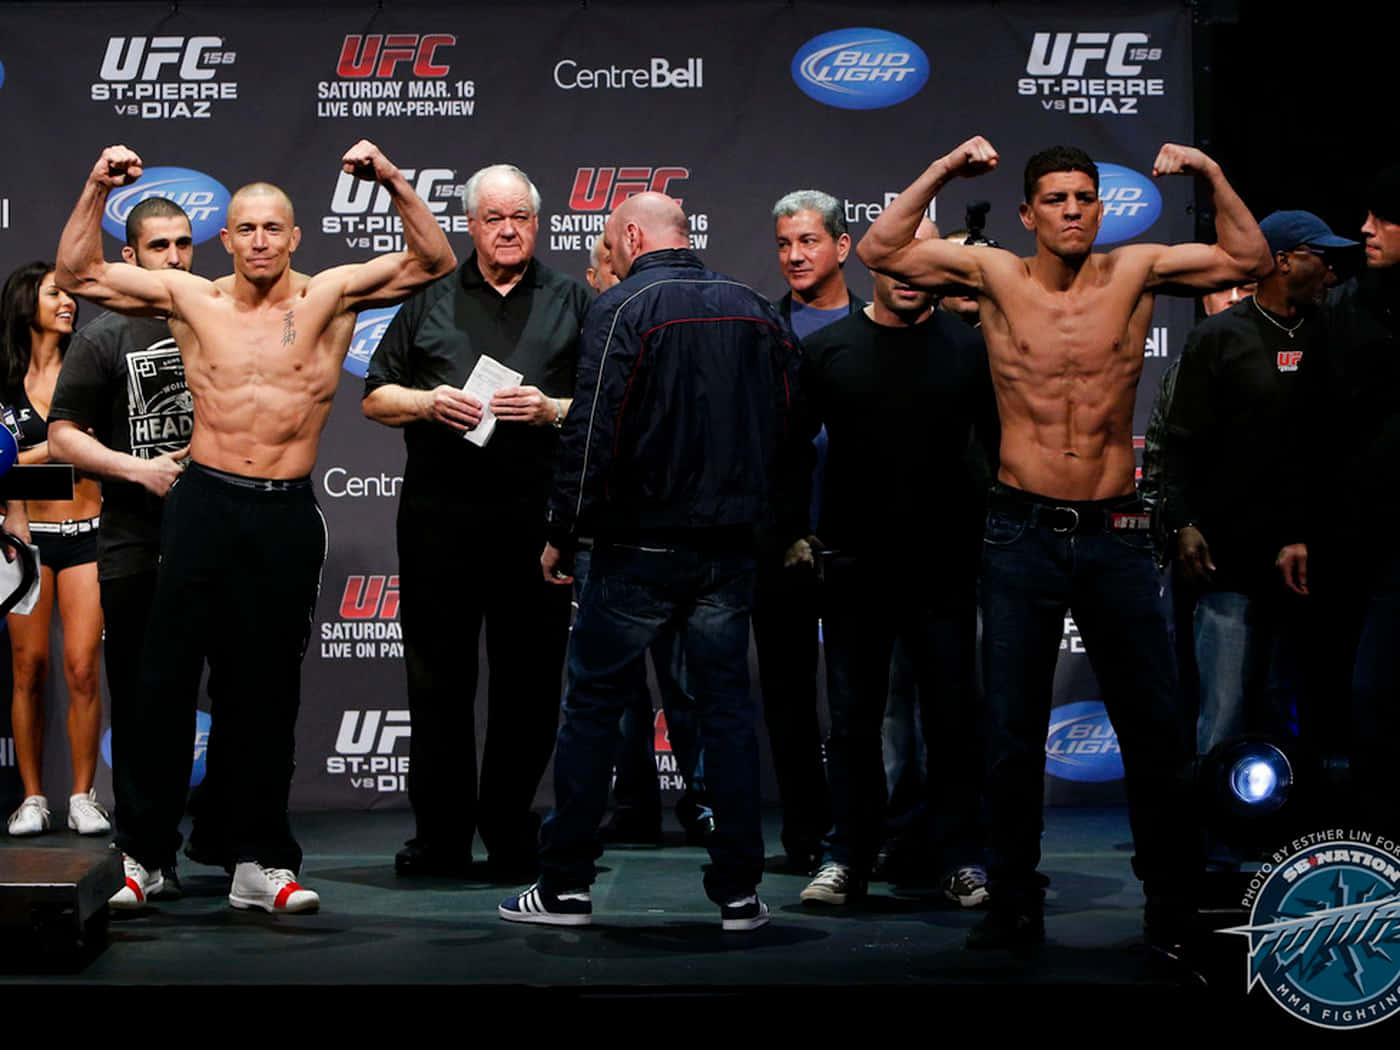 Georges St-Pierre and Nick Diaz face-off during the weigh-in Wallpaper